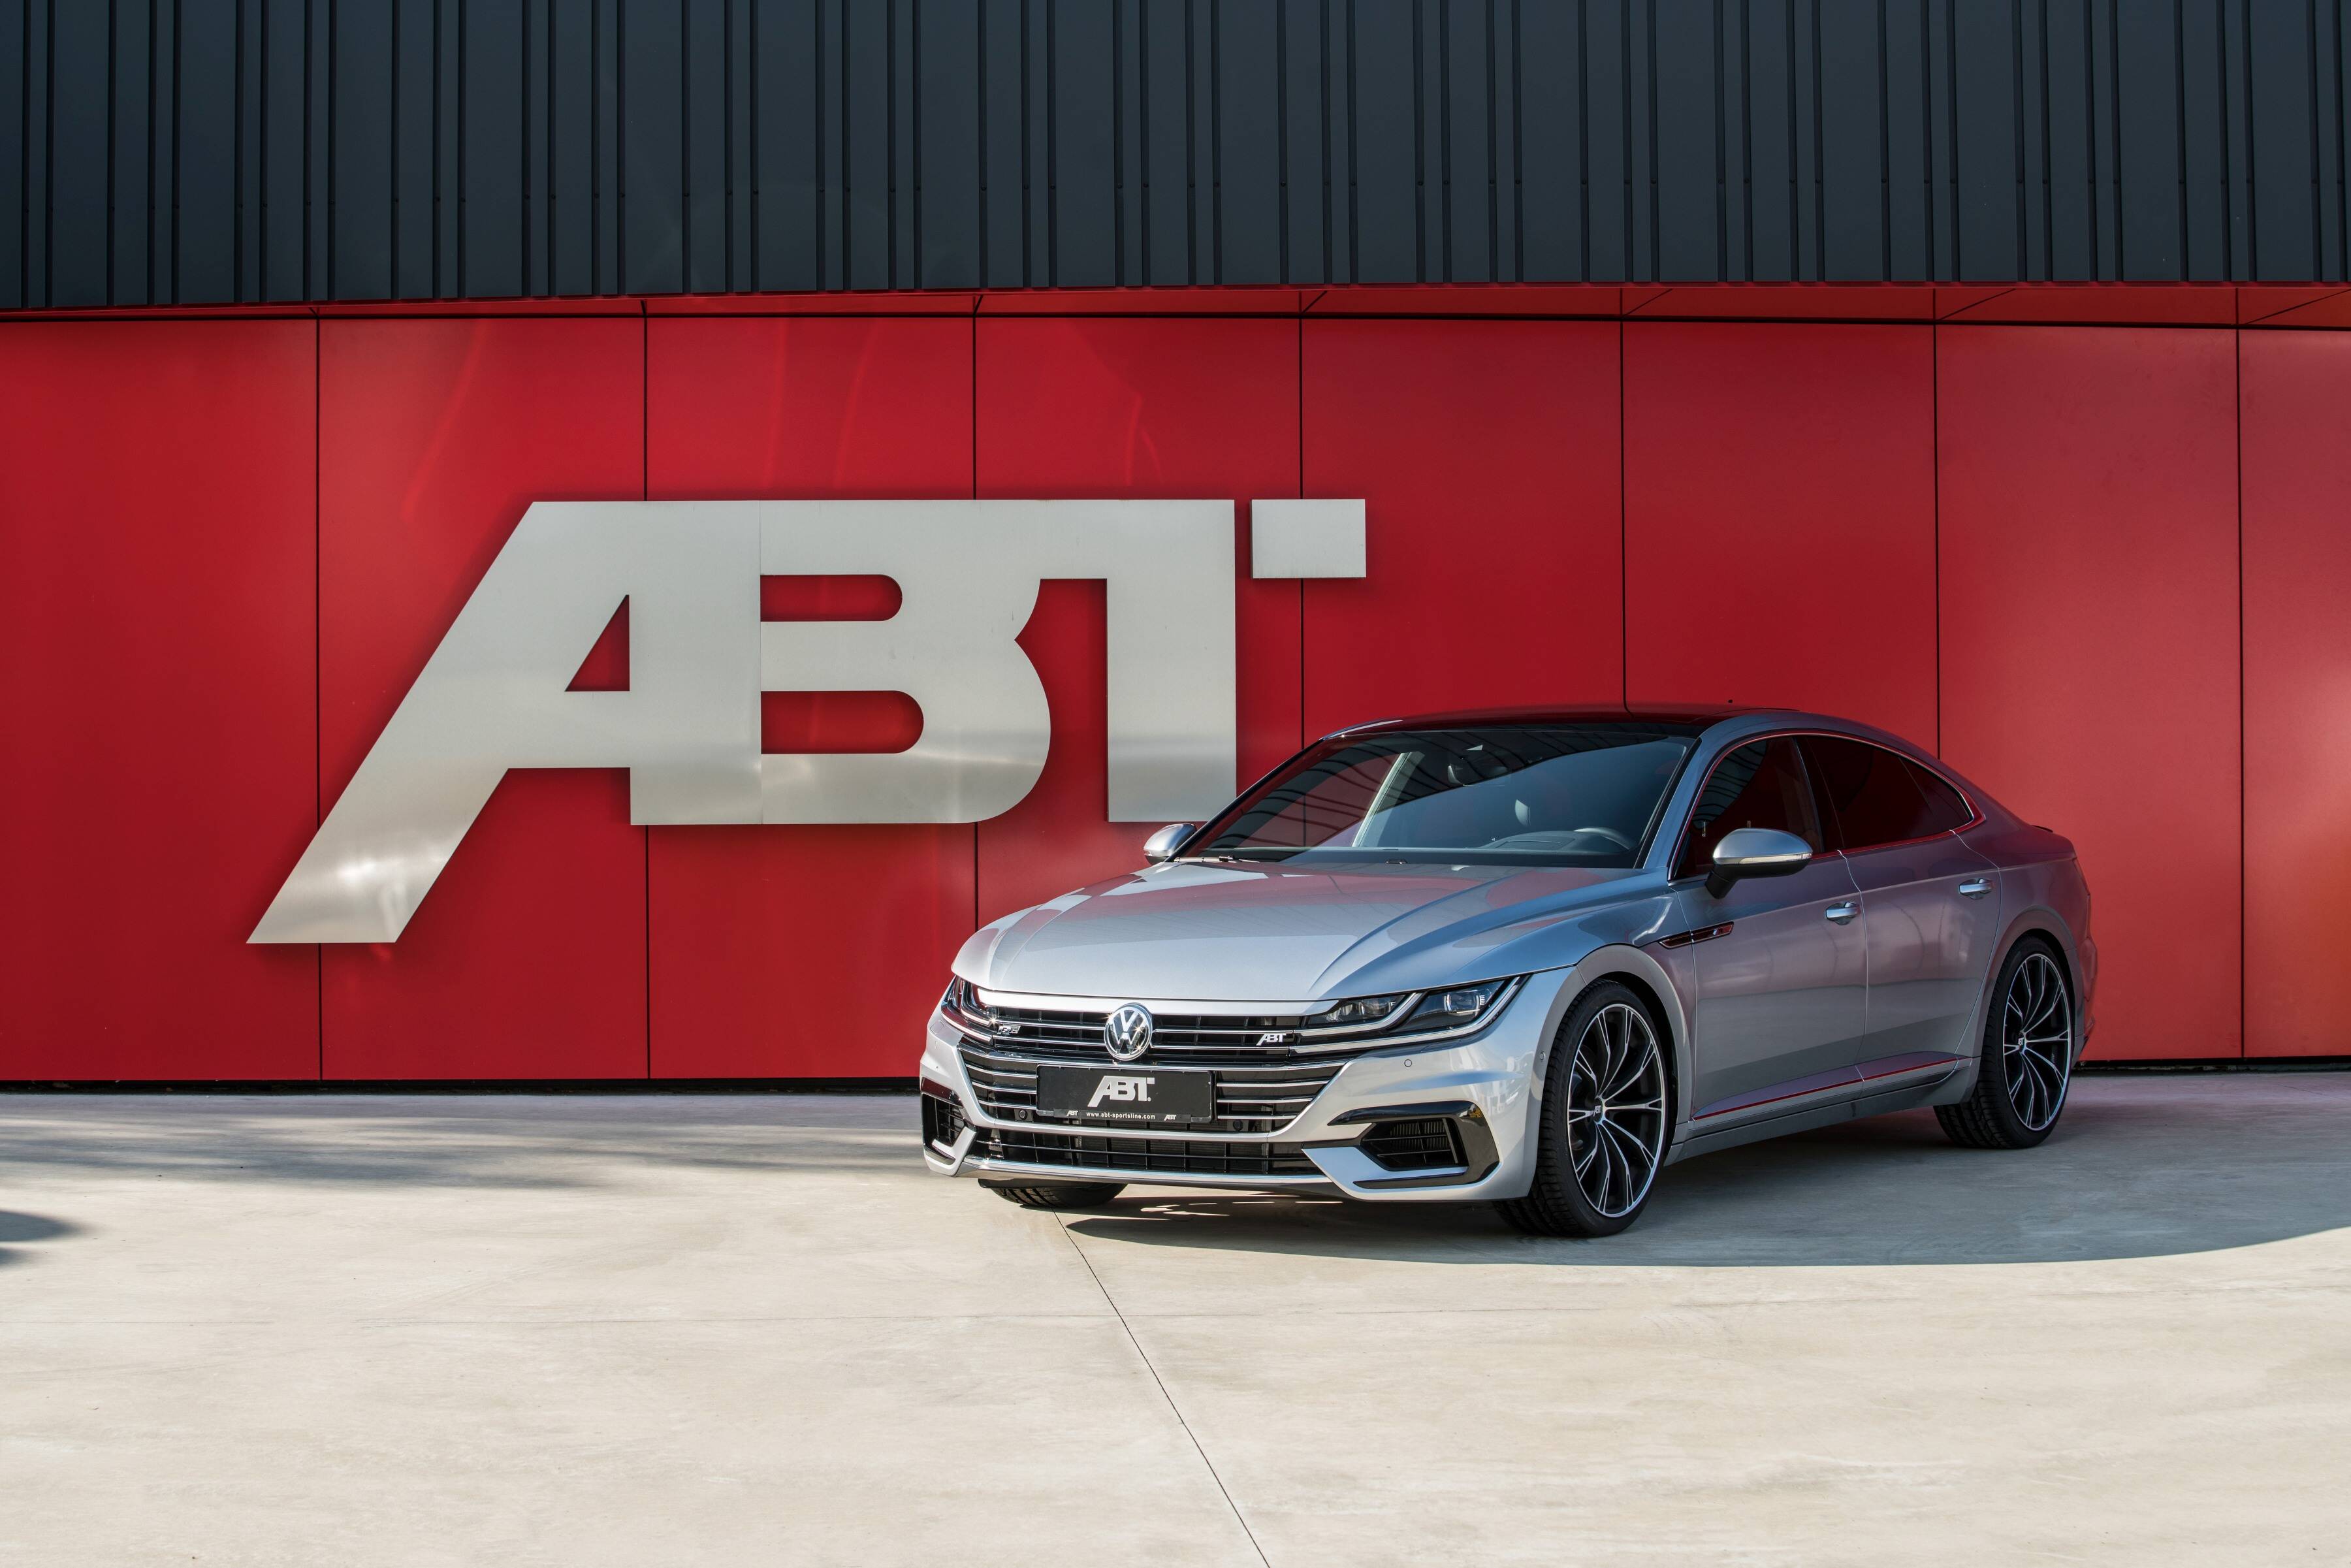 Fast work of art: VW Arteon with 336 hp and 420 Nm - Audi Tuning, VW  Tuning, Chiptuning von ABT Sportsline.